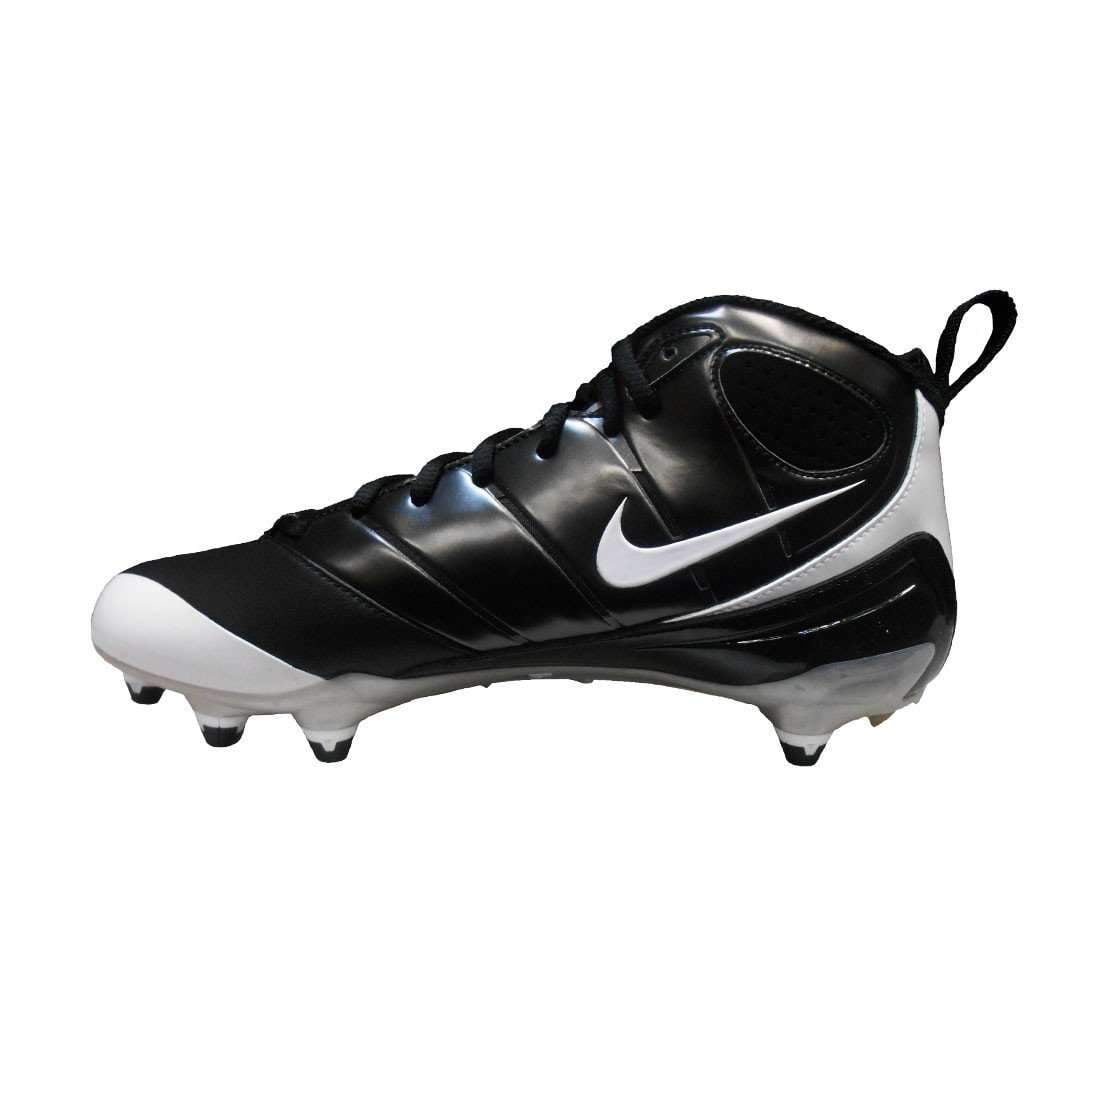 speed cleats for football